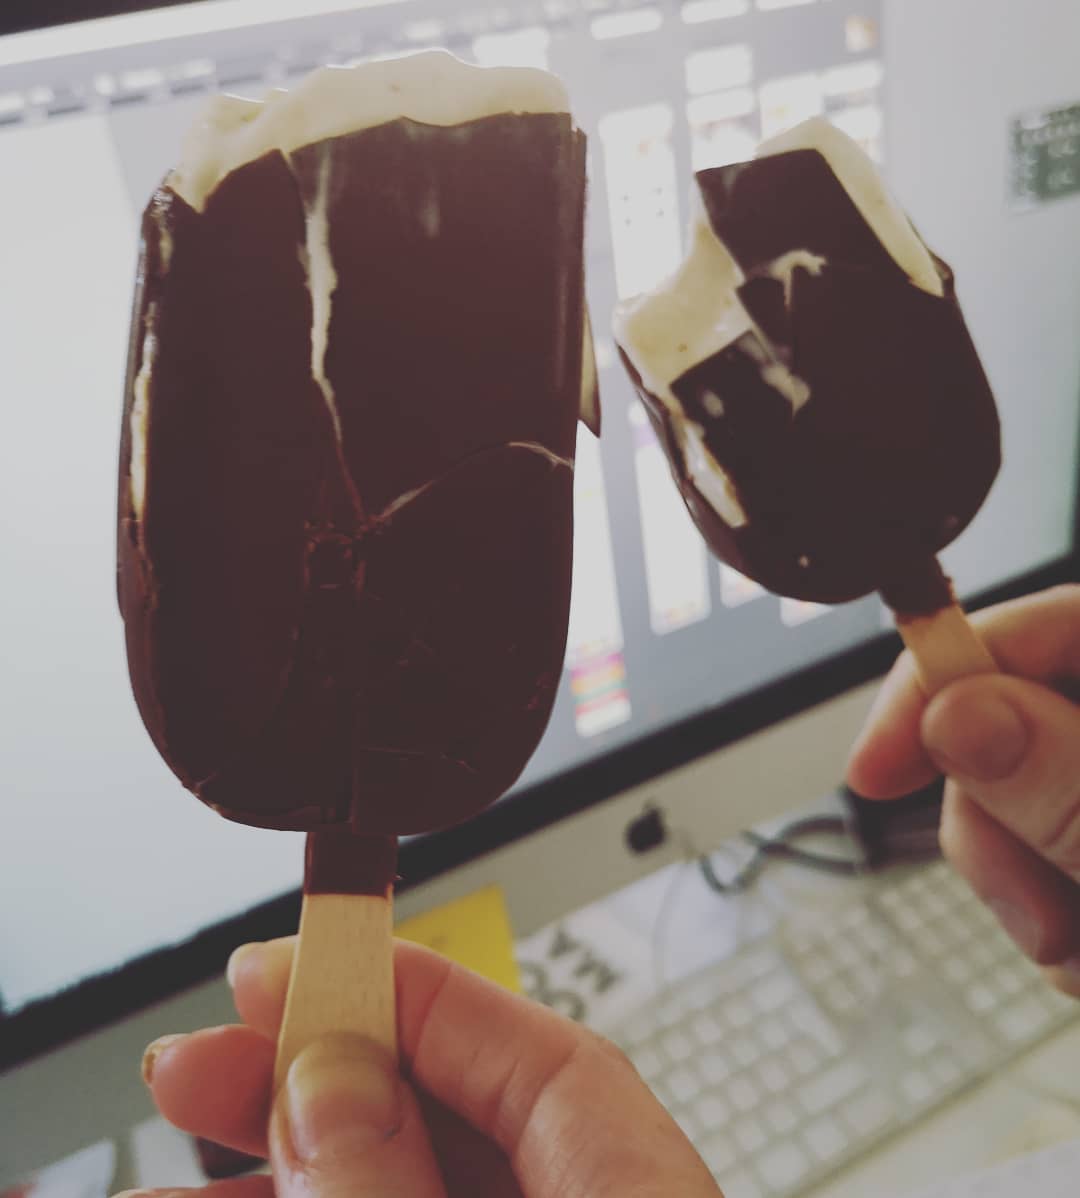 This is how our meetings roll today… #agencylife #weremelting #icecreamtime